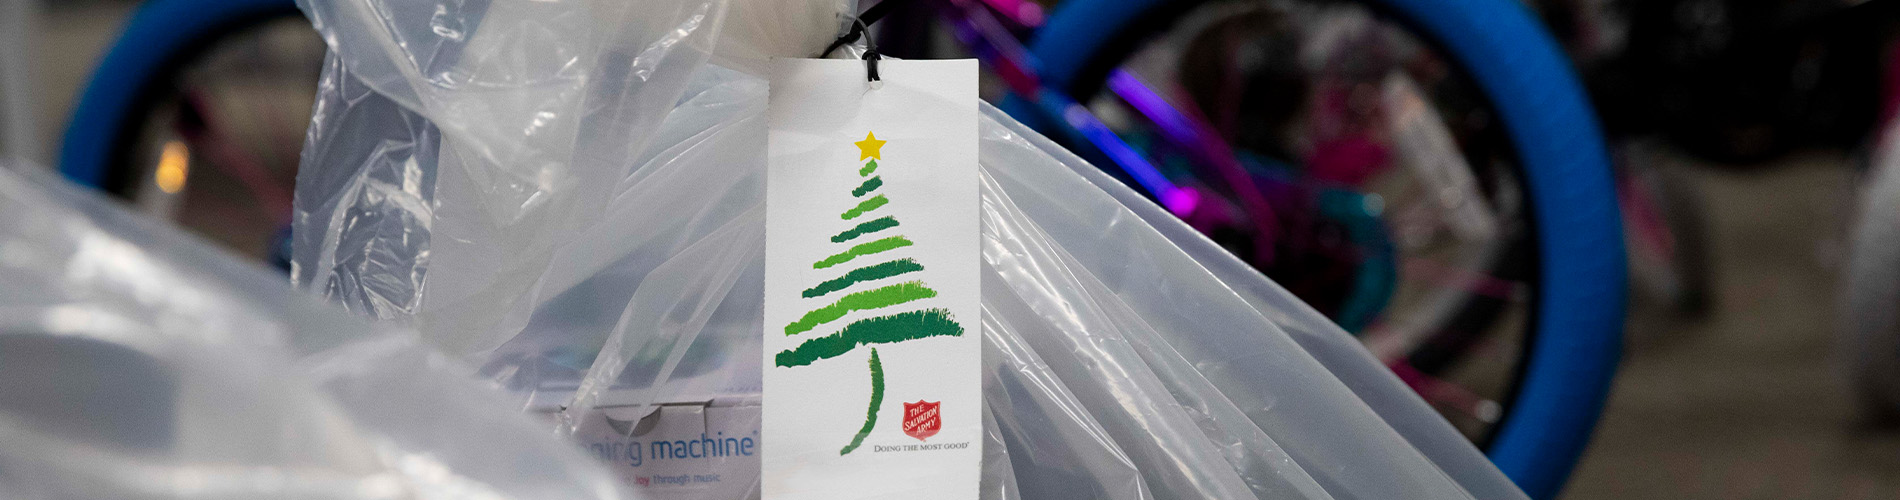 McNICHOLS gives back to the community through Angel Tree, a Salvation Army initiative around Christmas time.